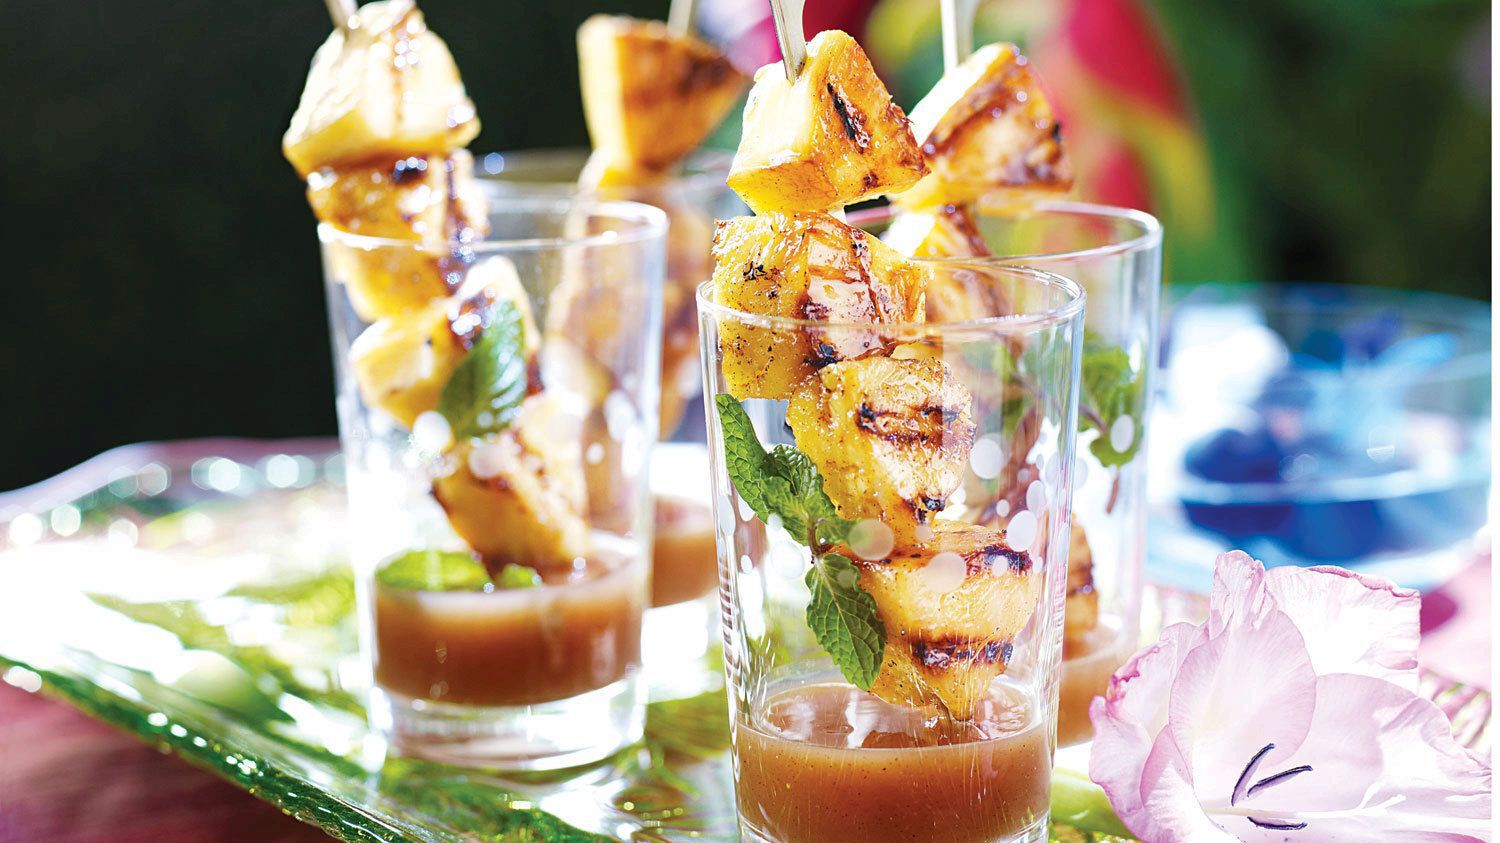 Grilled Pineapple with Spiced Fruit Sauce